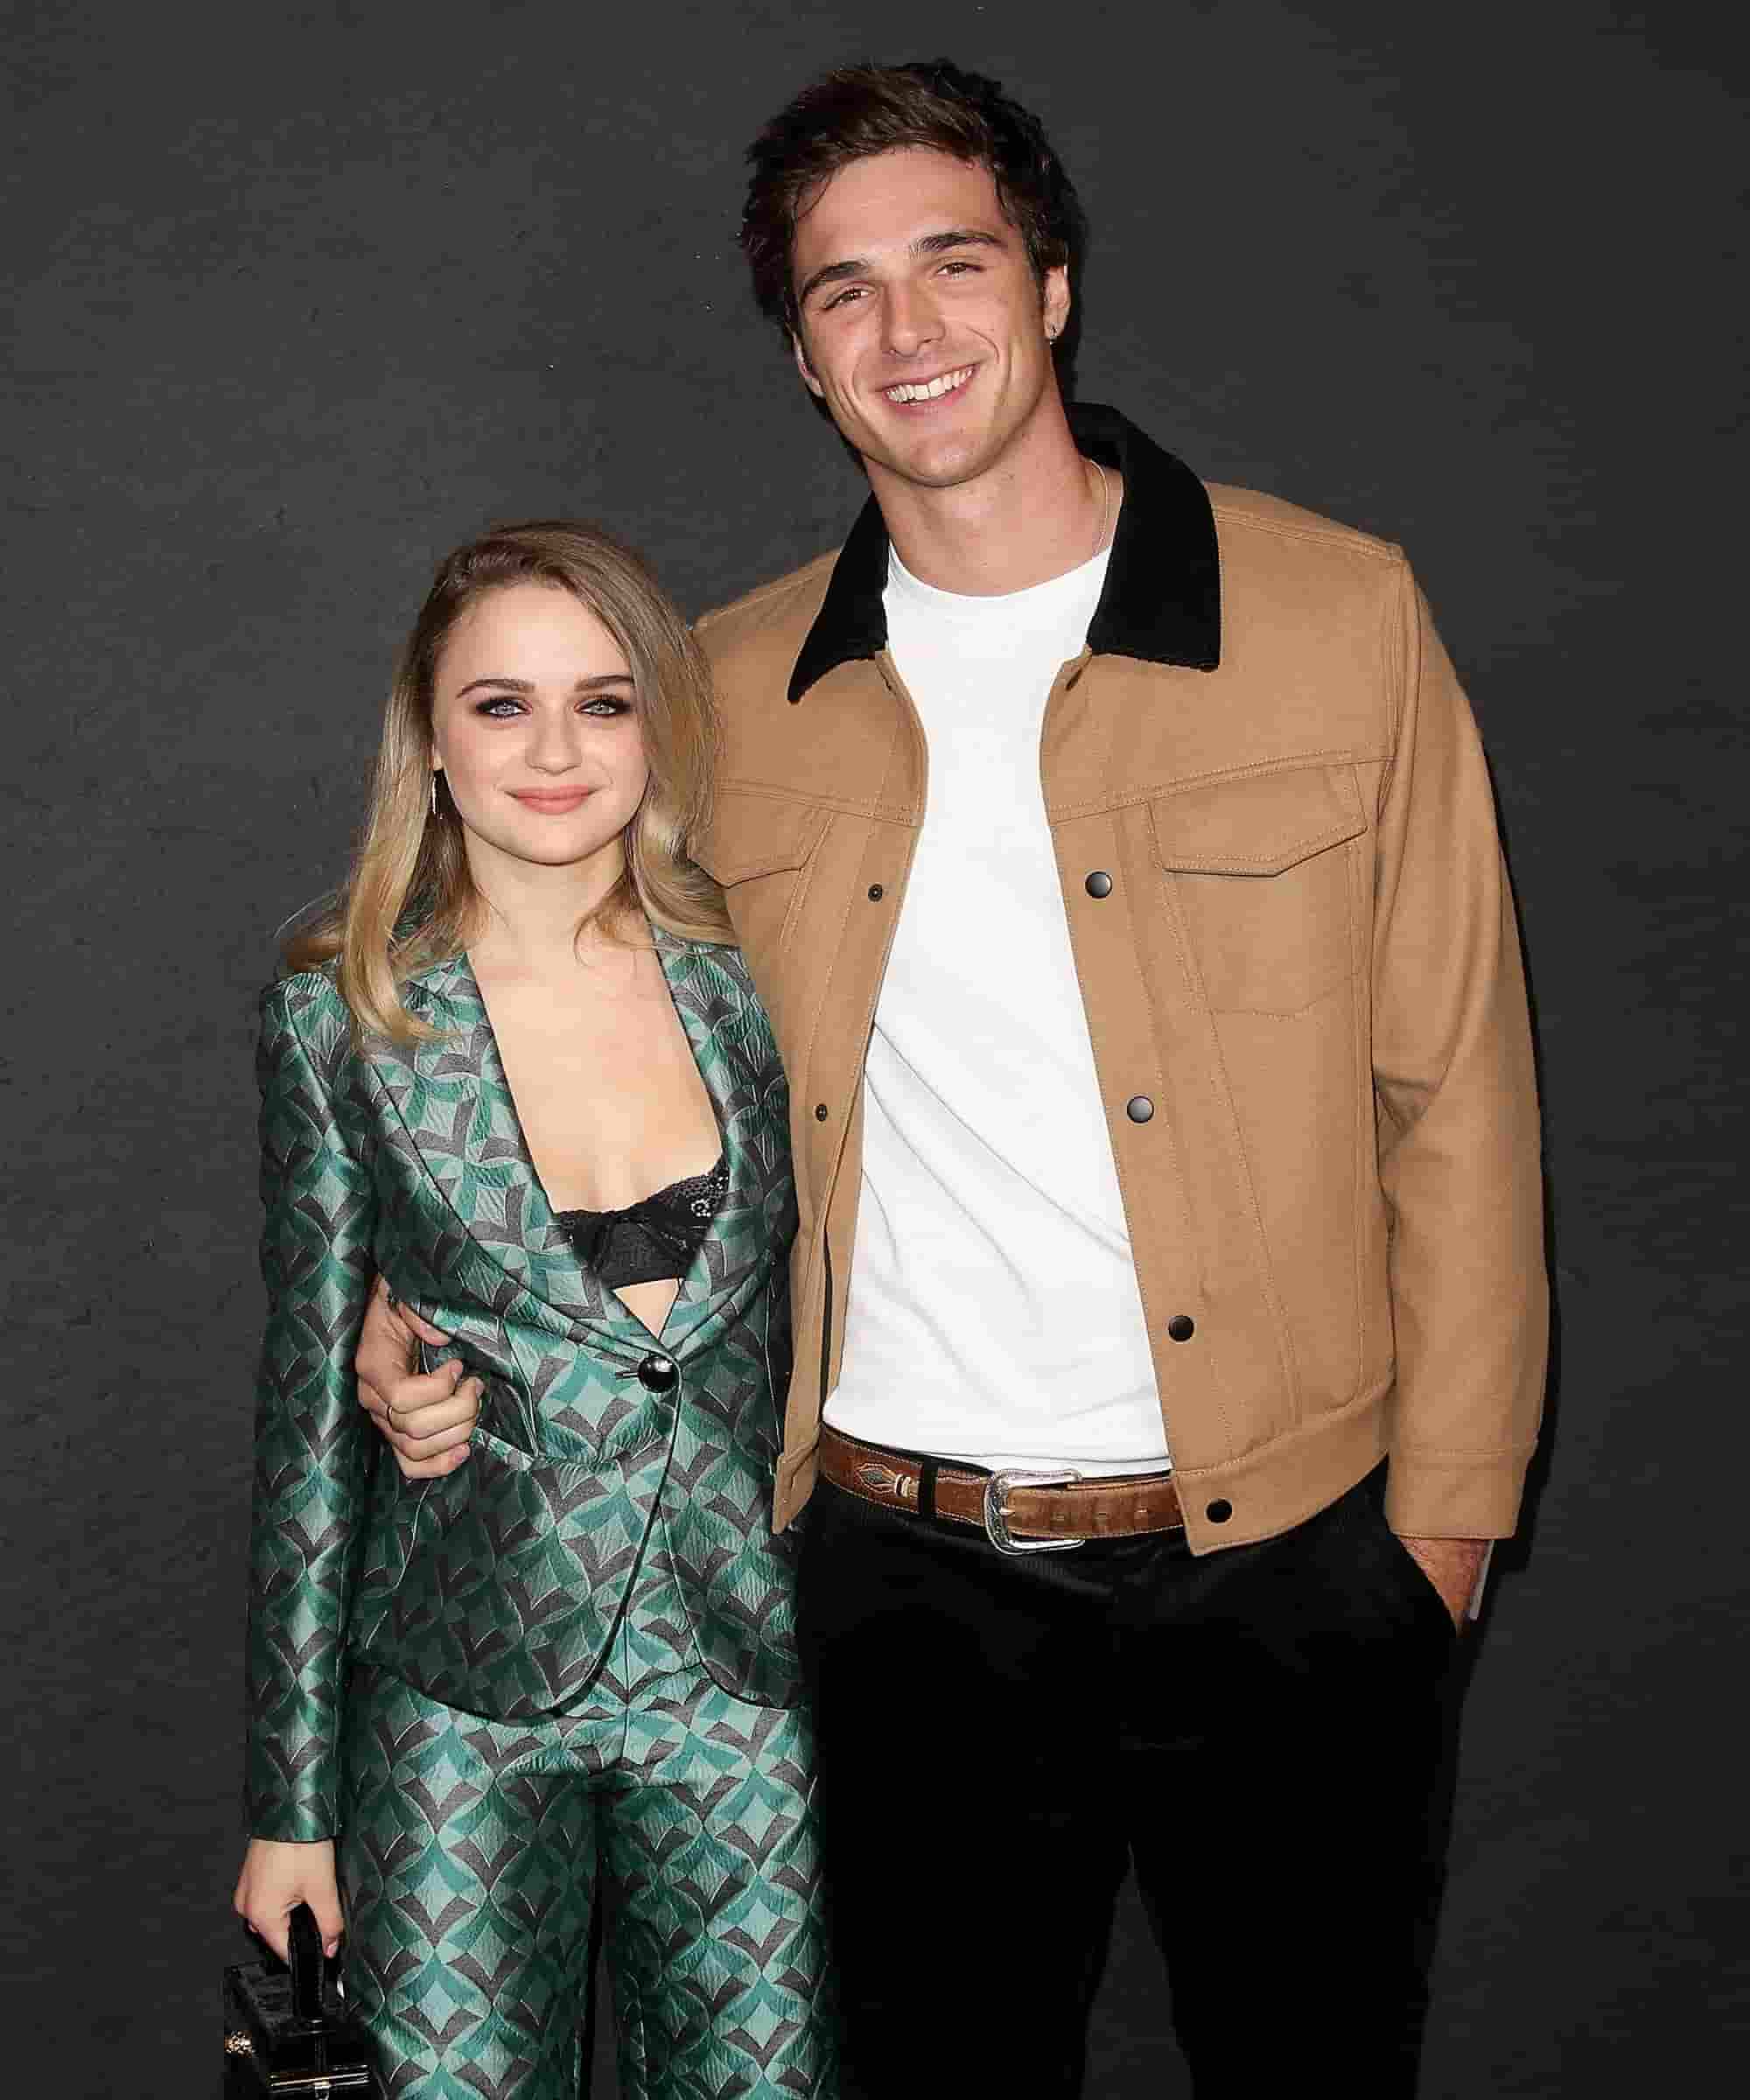 Image of Jacob Elordi with his former partner and co-artist, Joey King